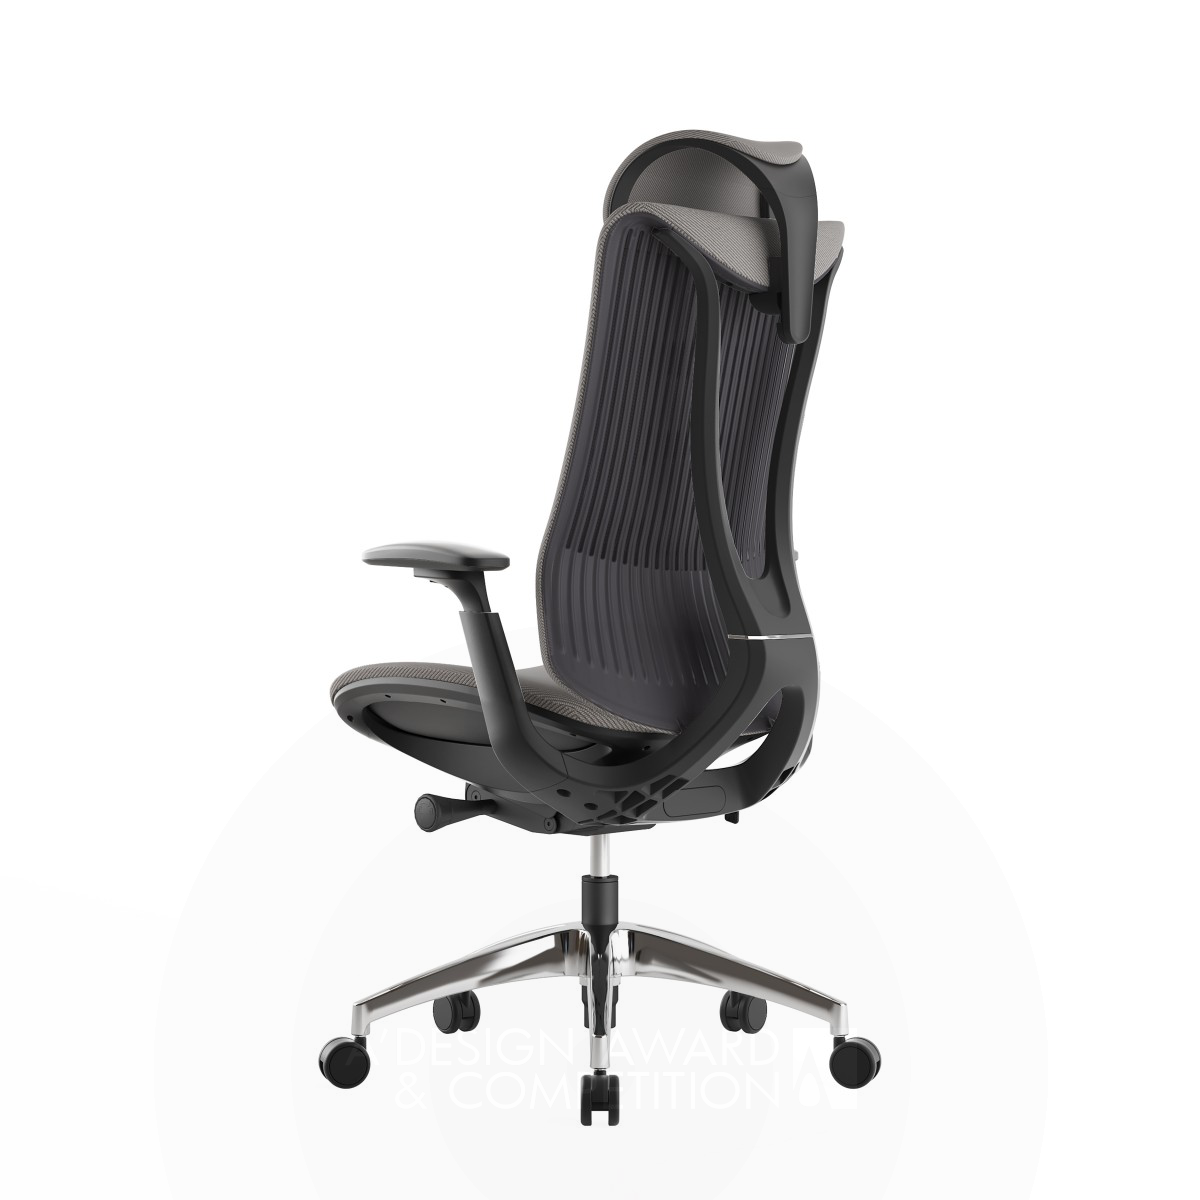 Icloud Office Chair: Redefining Comfort and Style